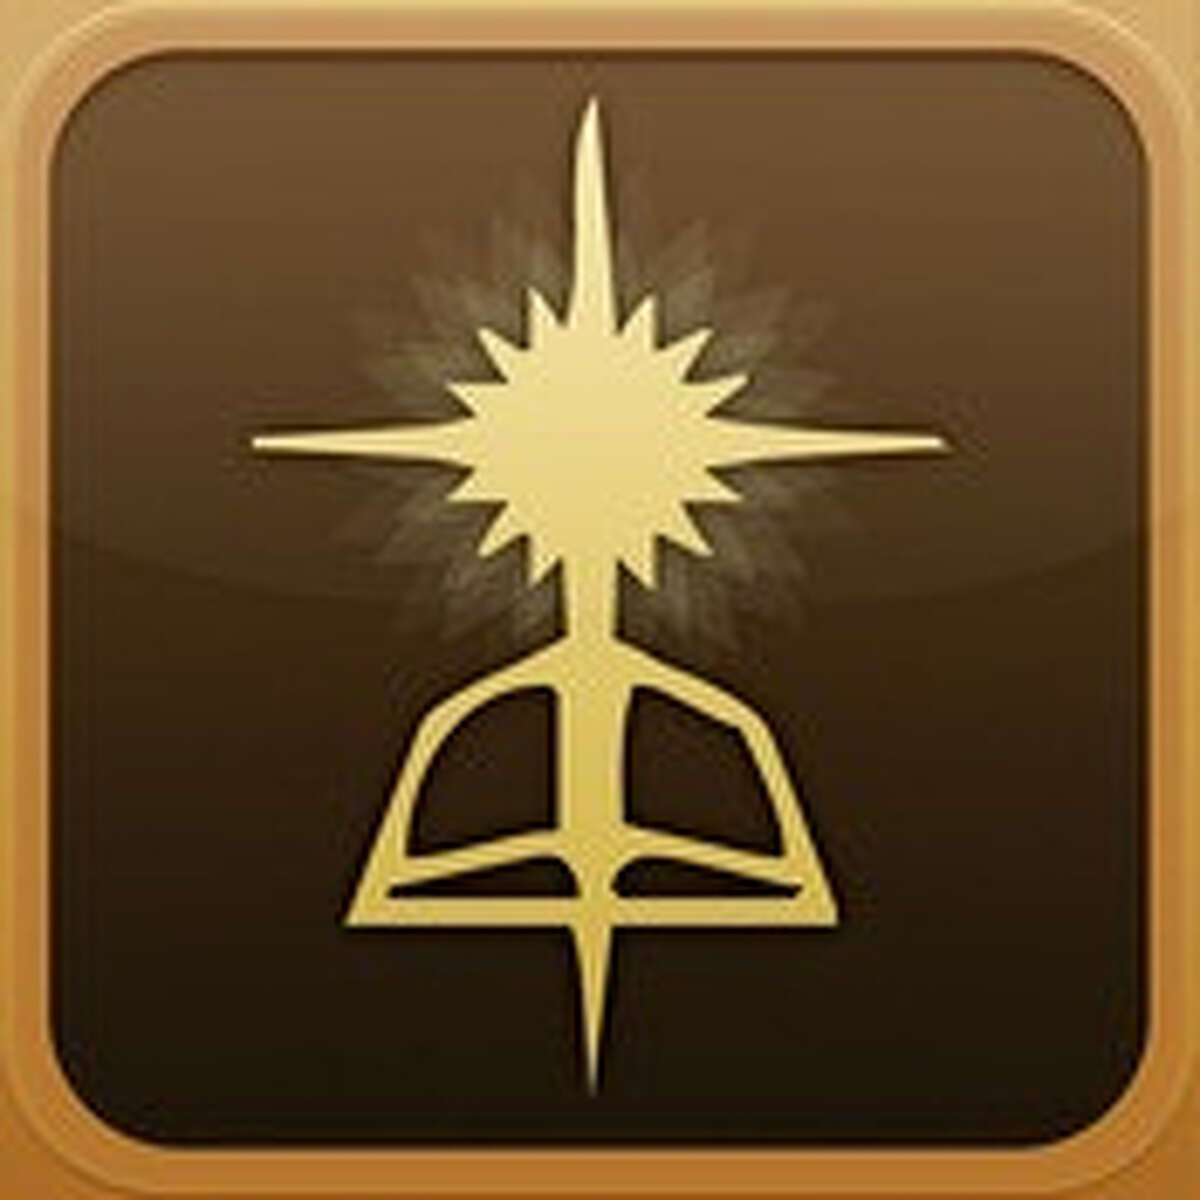 divine office app for iphone